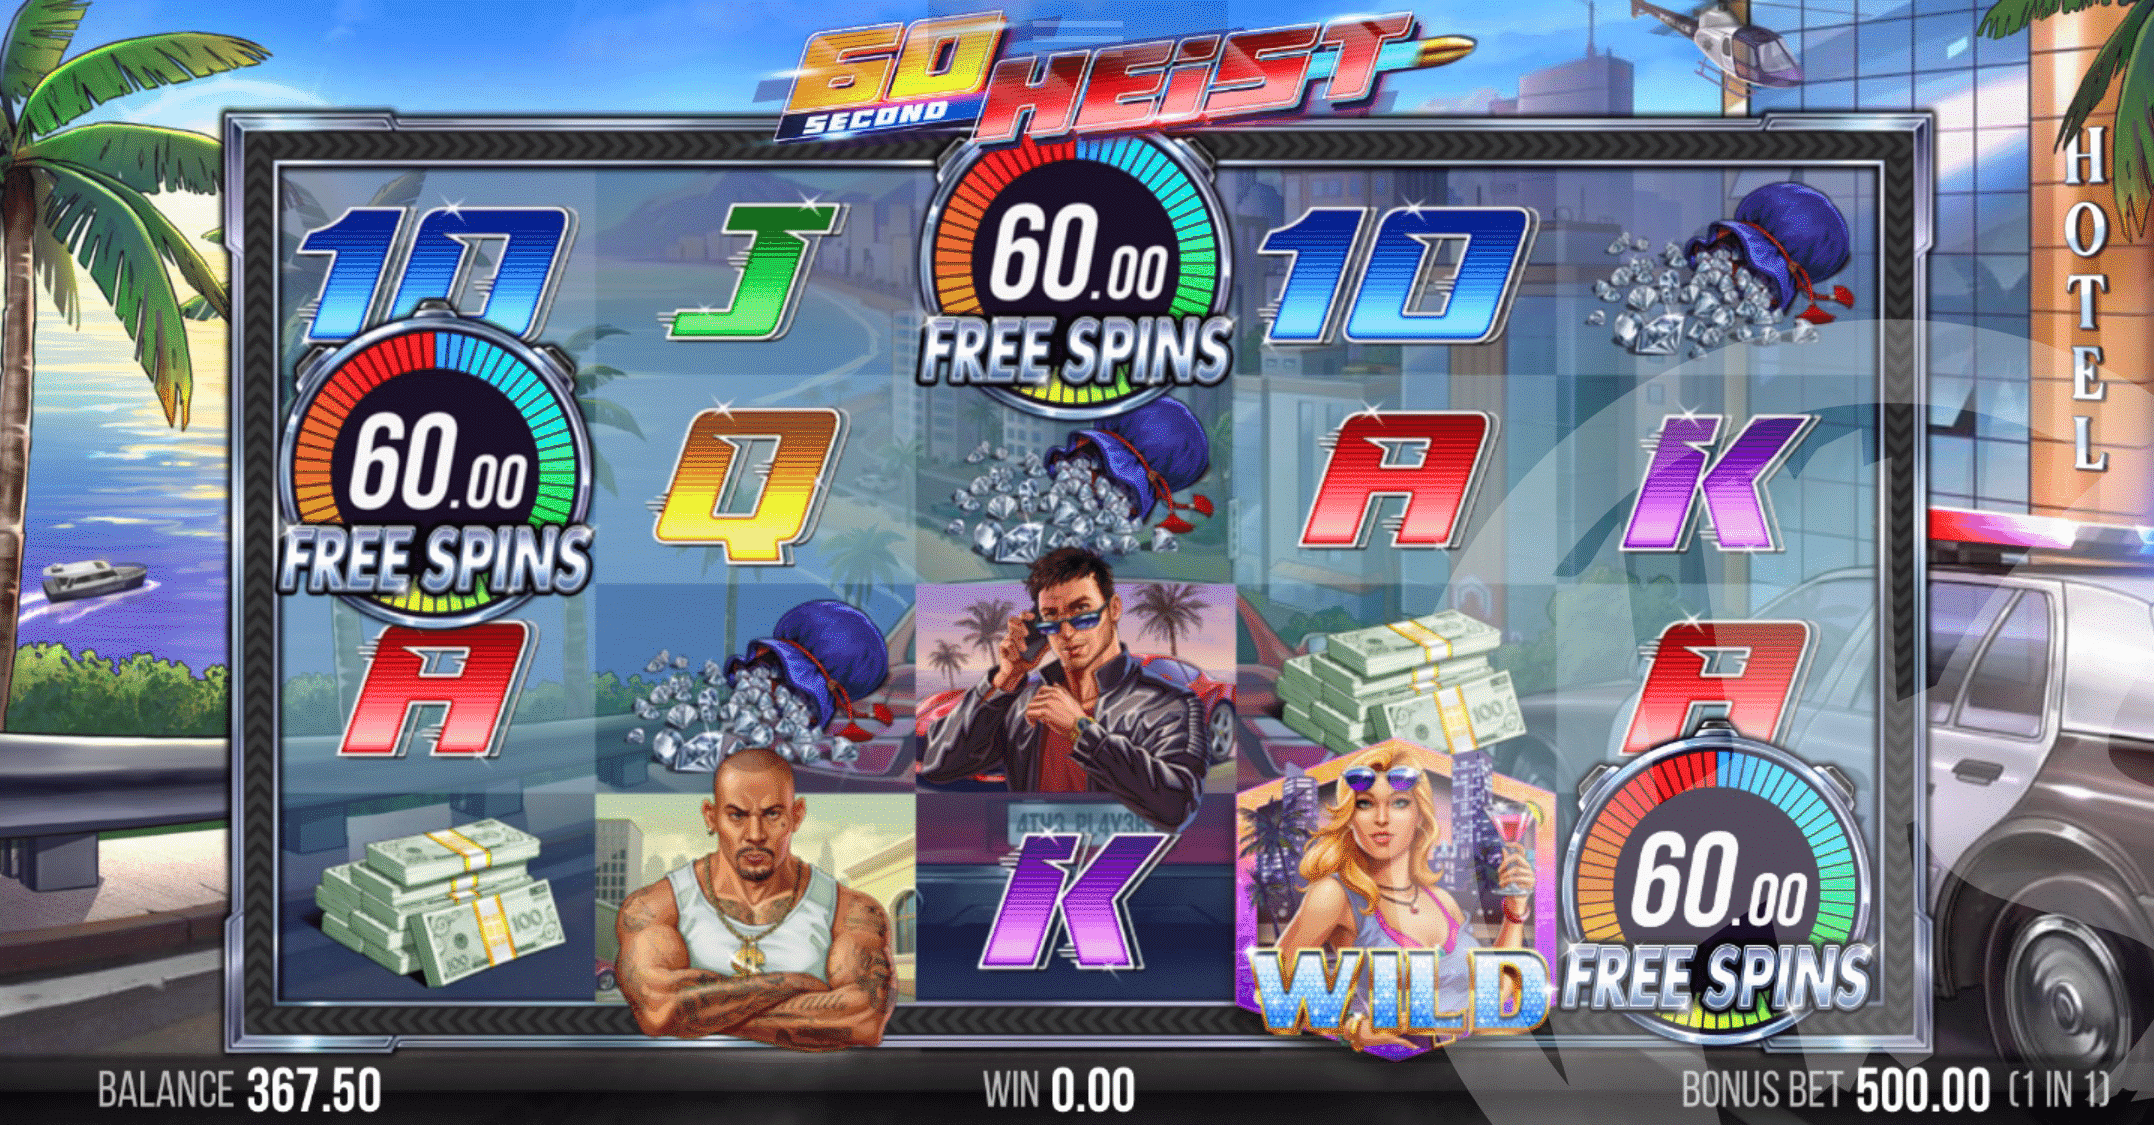 3 Scatters Trigger Free Spins